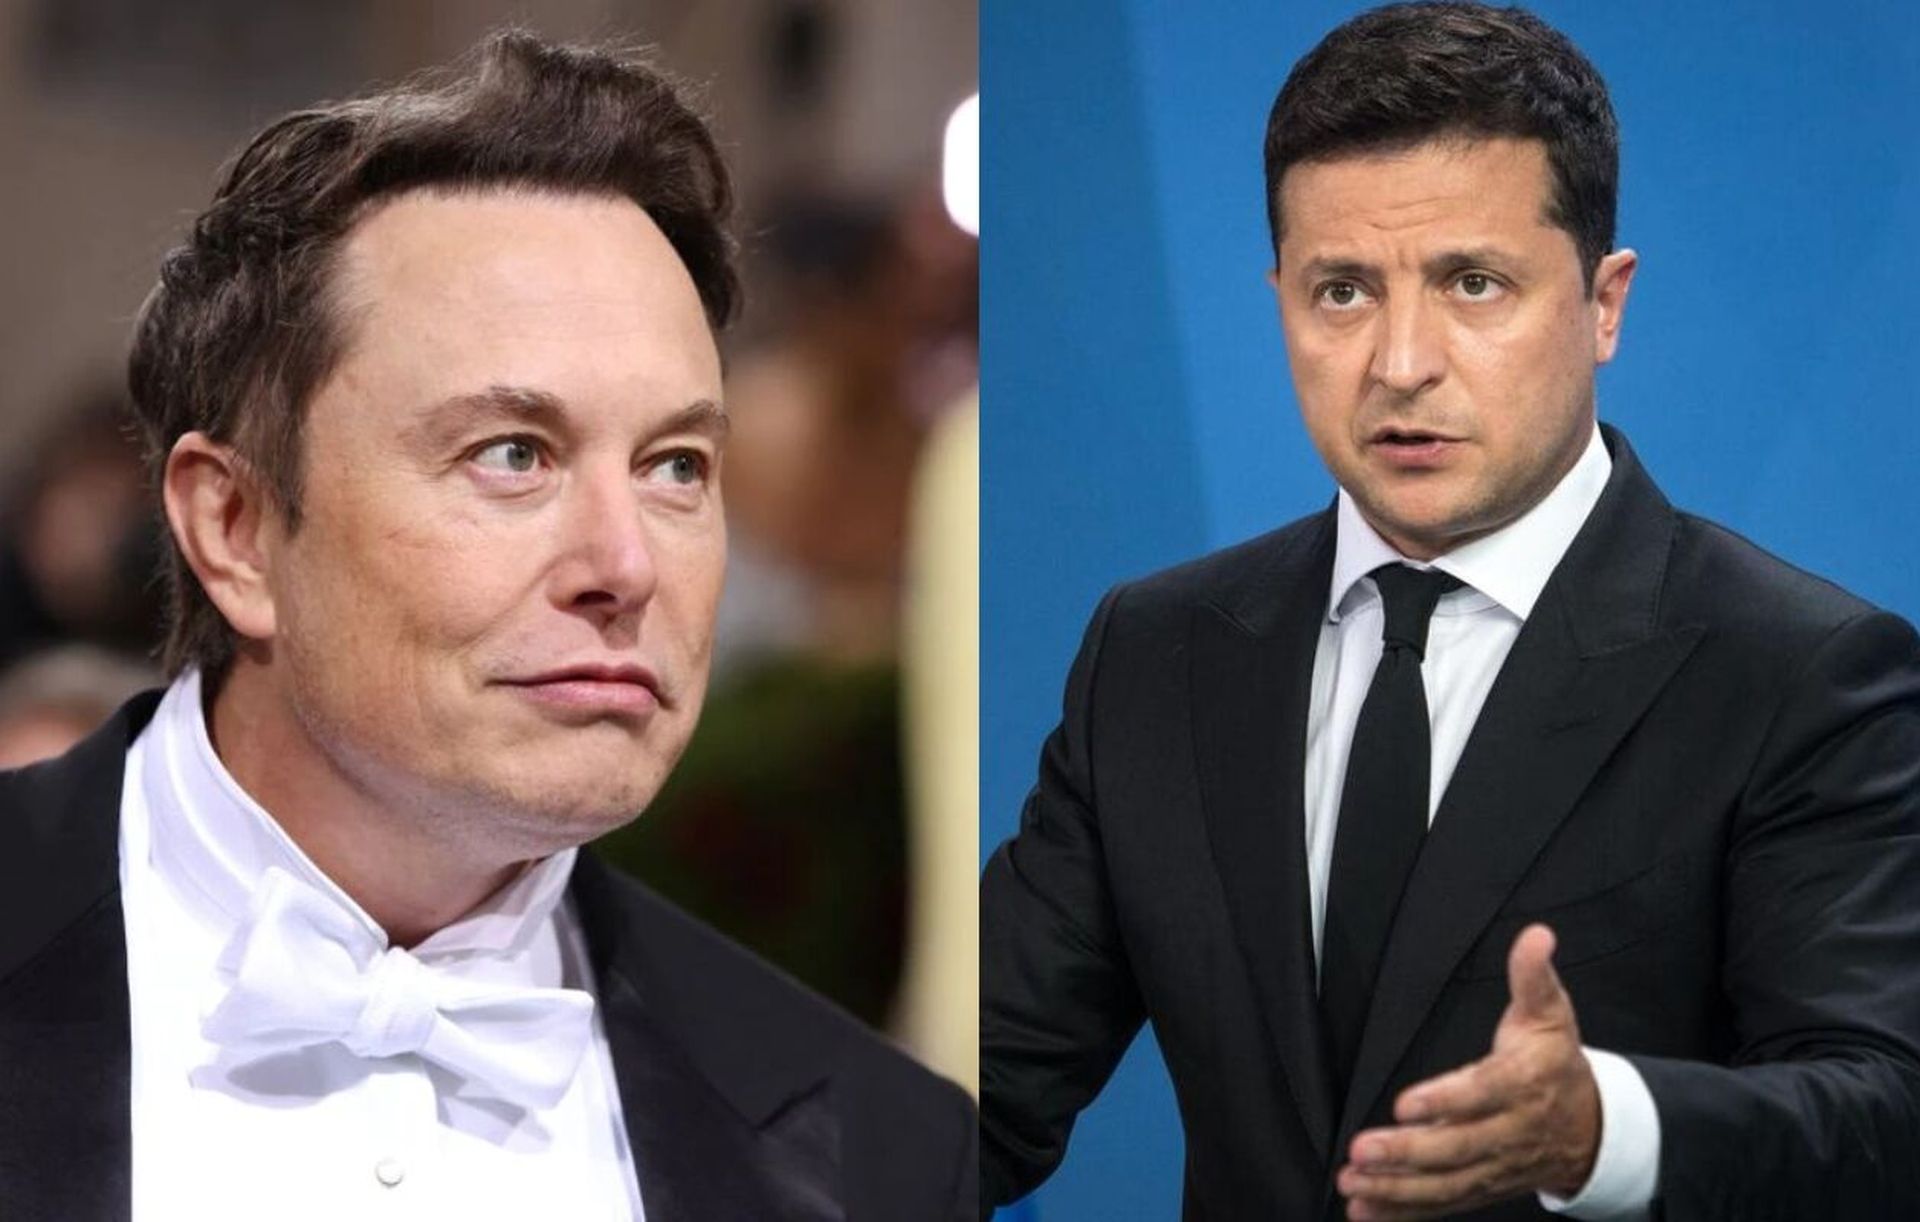 Elon Musk tweet about Ukraine and the ongoing war with Russia, and Elon Musk peace plan gets a reaction from Ukrainian President Volodymyr Zelensky.